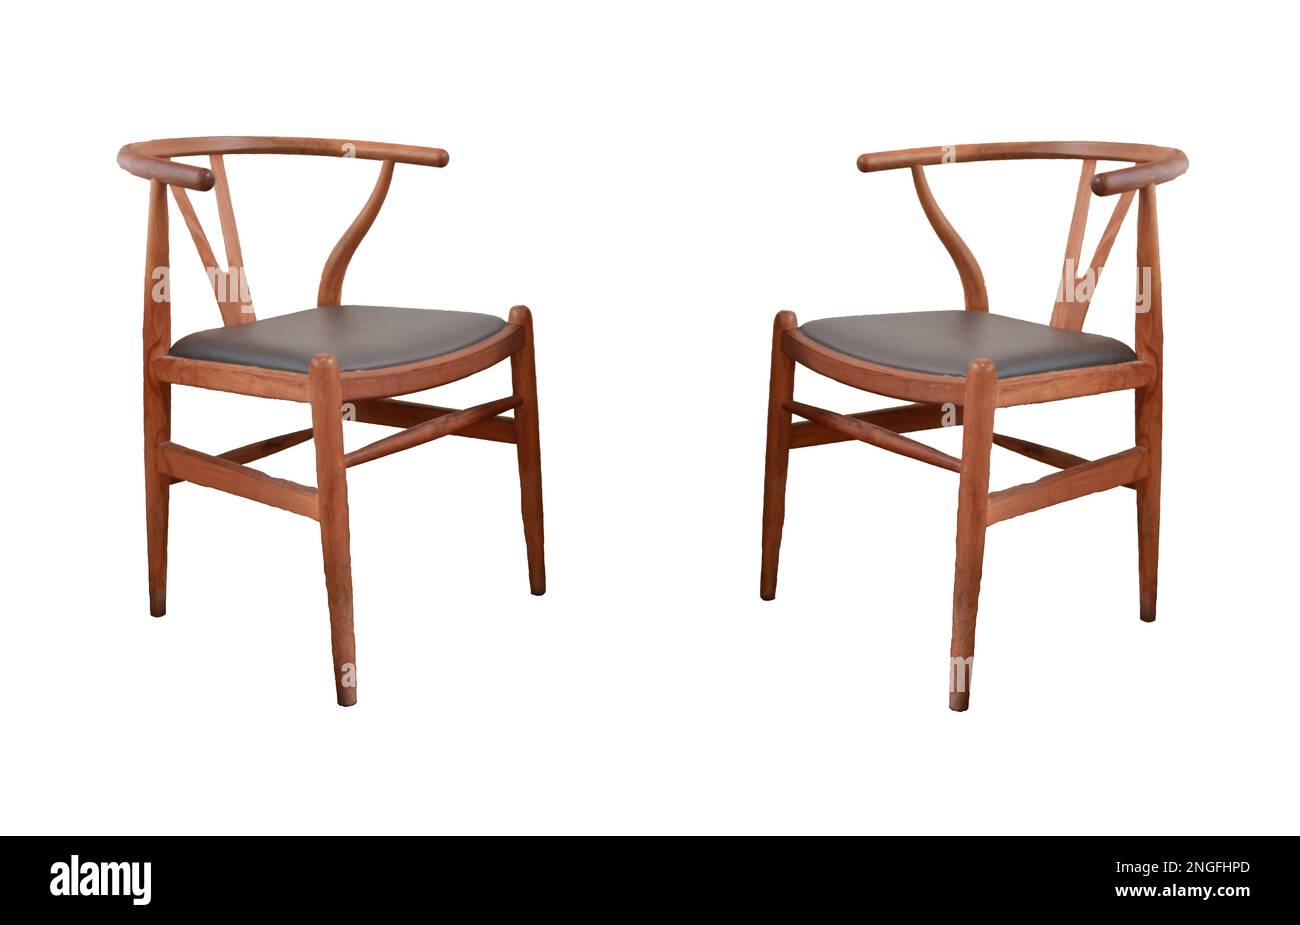 Left and right view wooden chairs isolated on white background, with clipping path Stock Photo